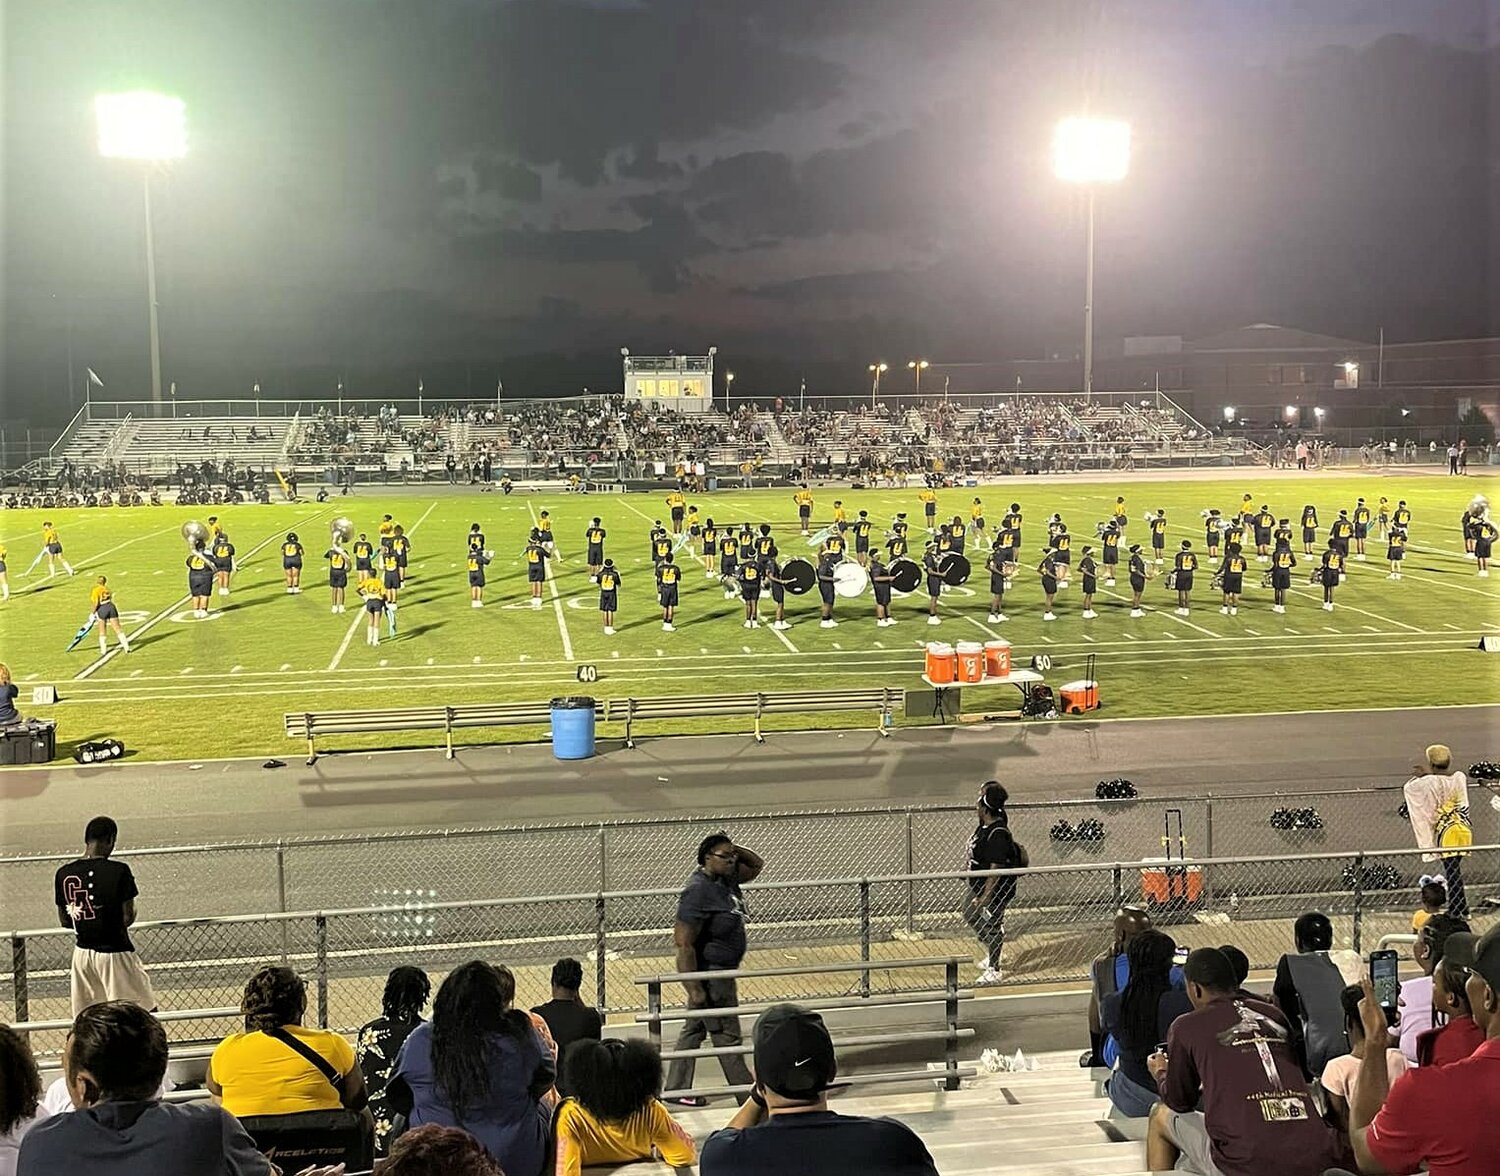 The E.E. Smith High School marching band is a major player in home football games.